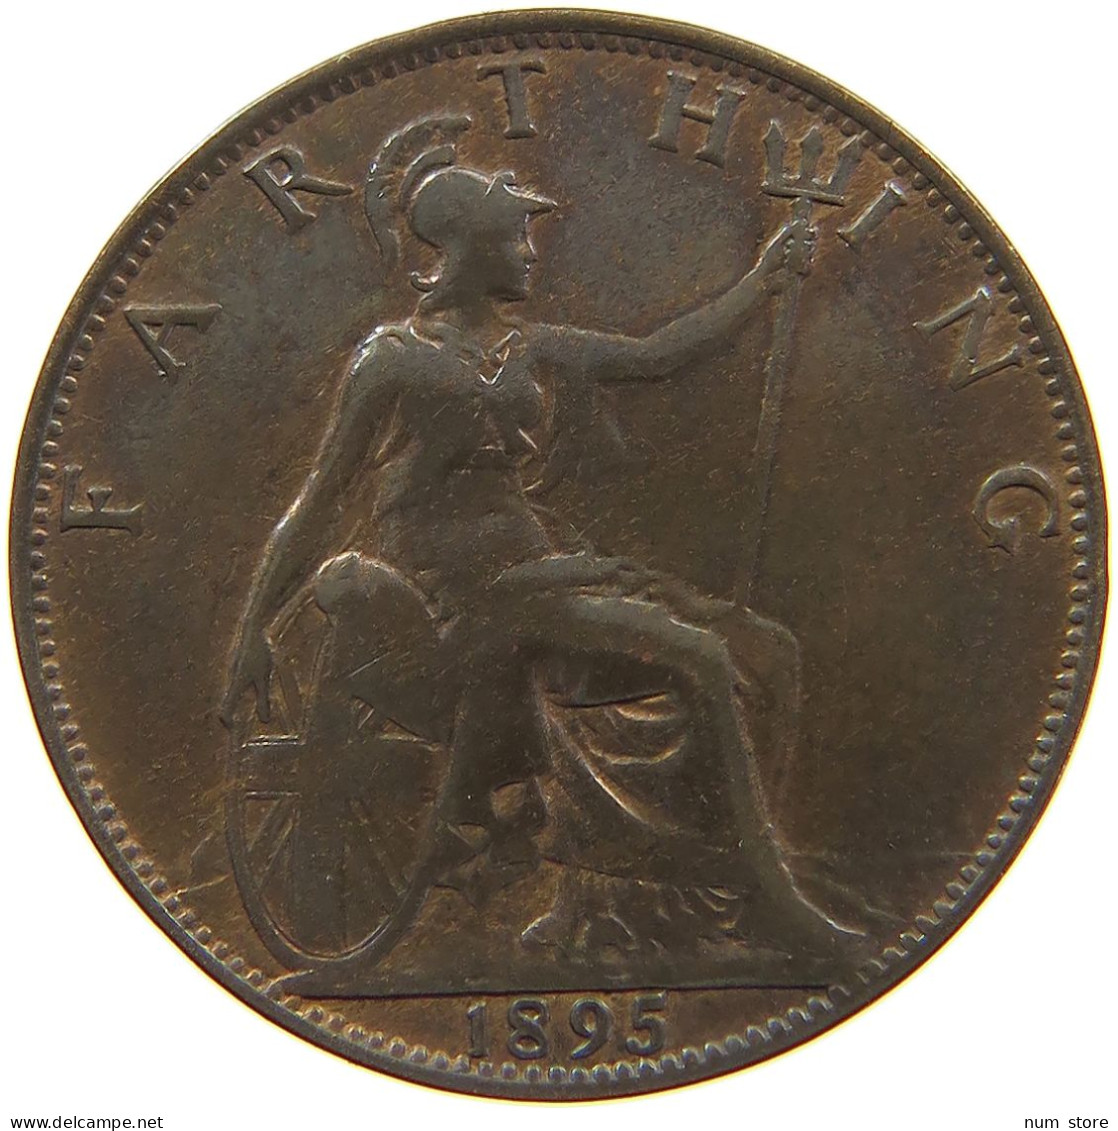 GREAT BRITAIN FARTHING 1895 Victoria 1837-1901 #a085 0625 - B. 1 Farthing